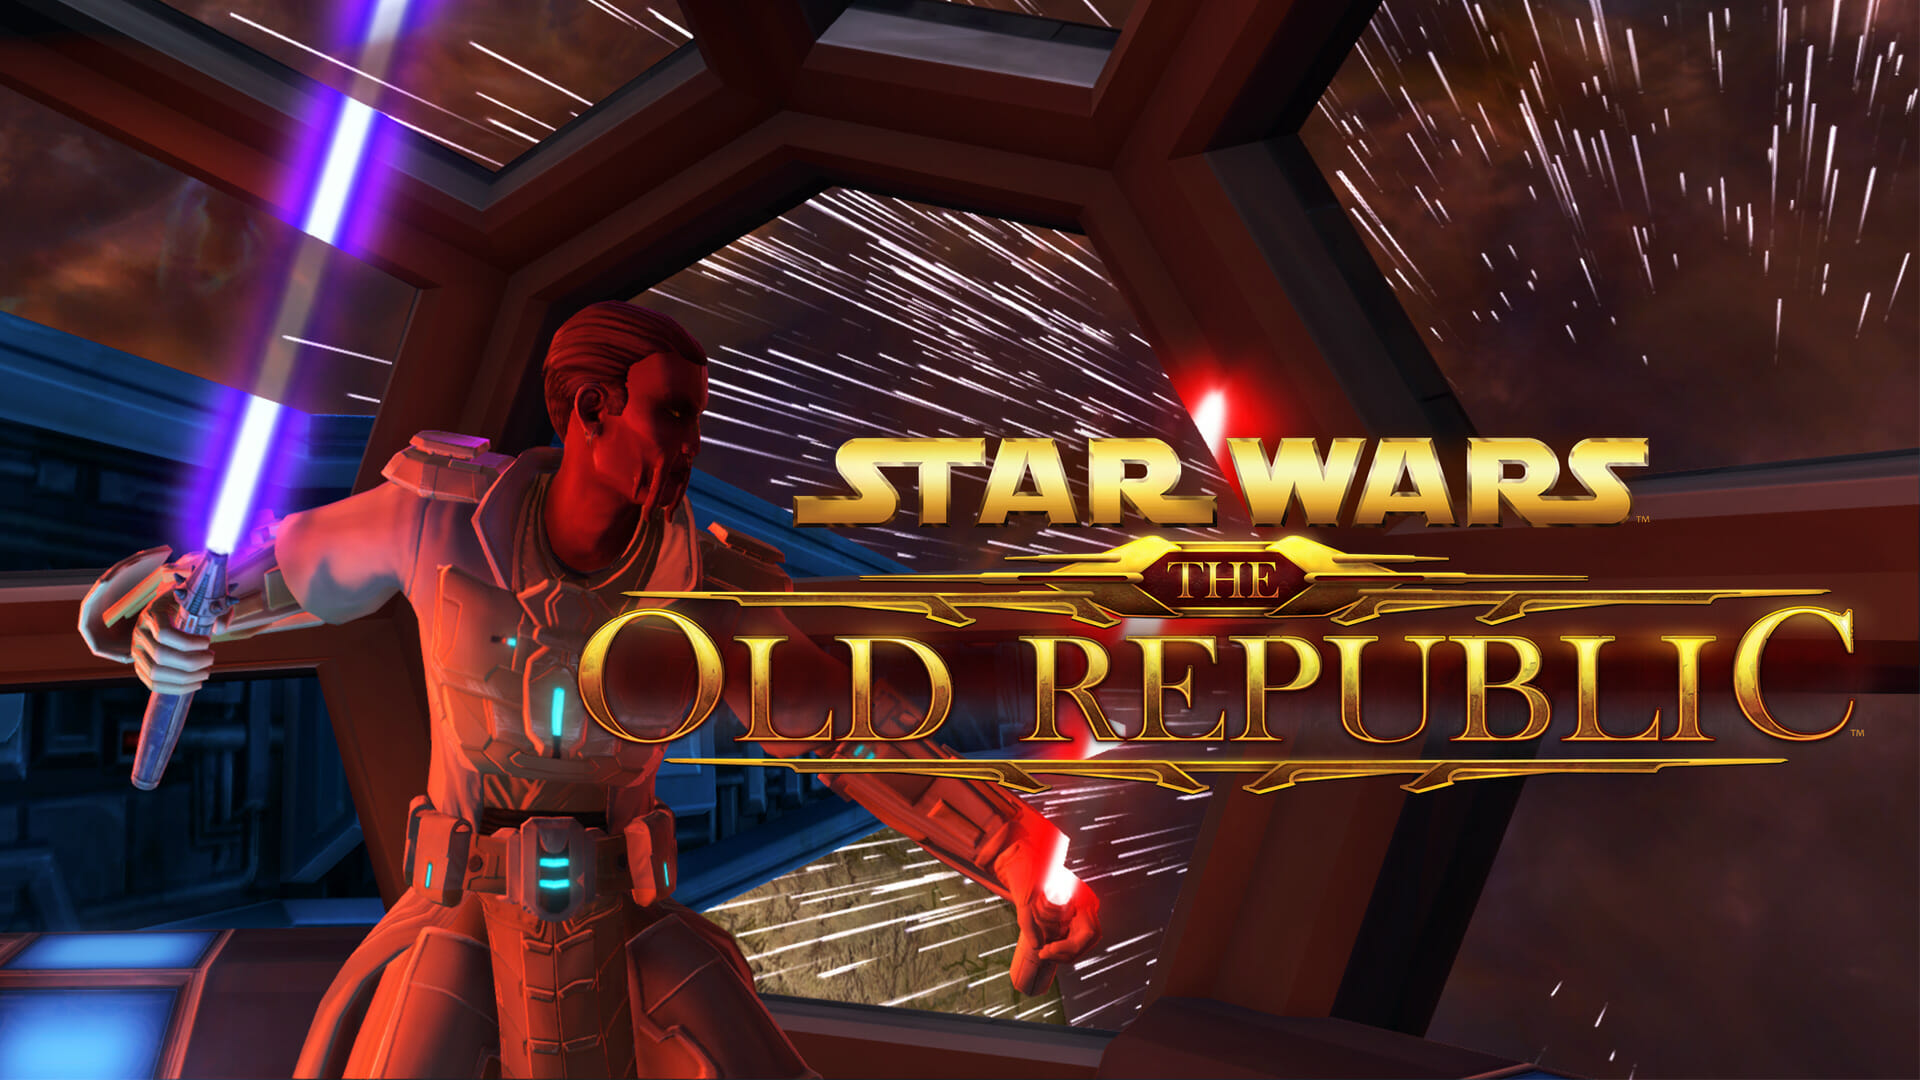 Star Wars: The Old potentially being handed over from Bioware studio to Broadsword